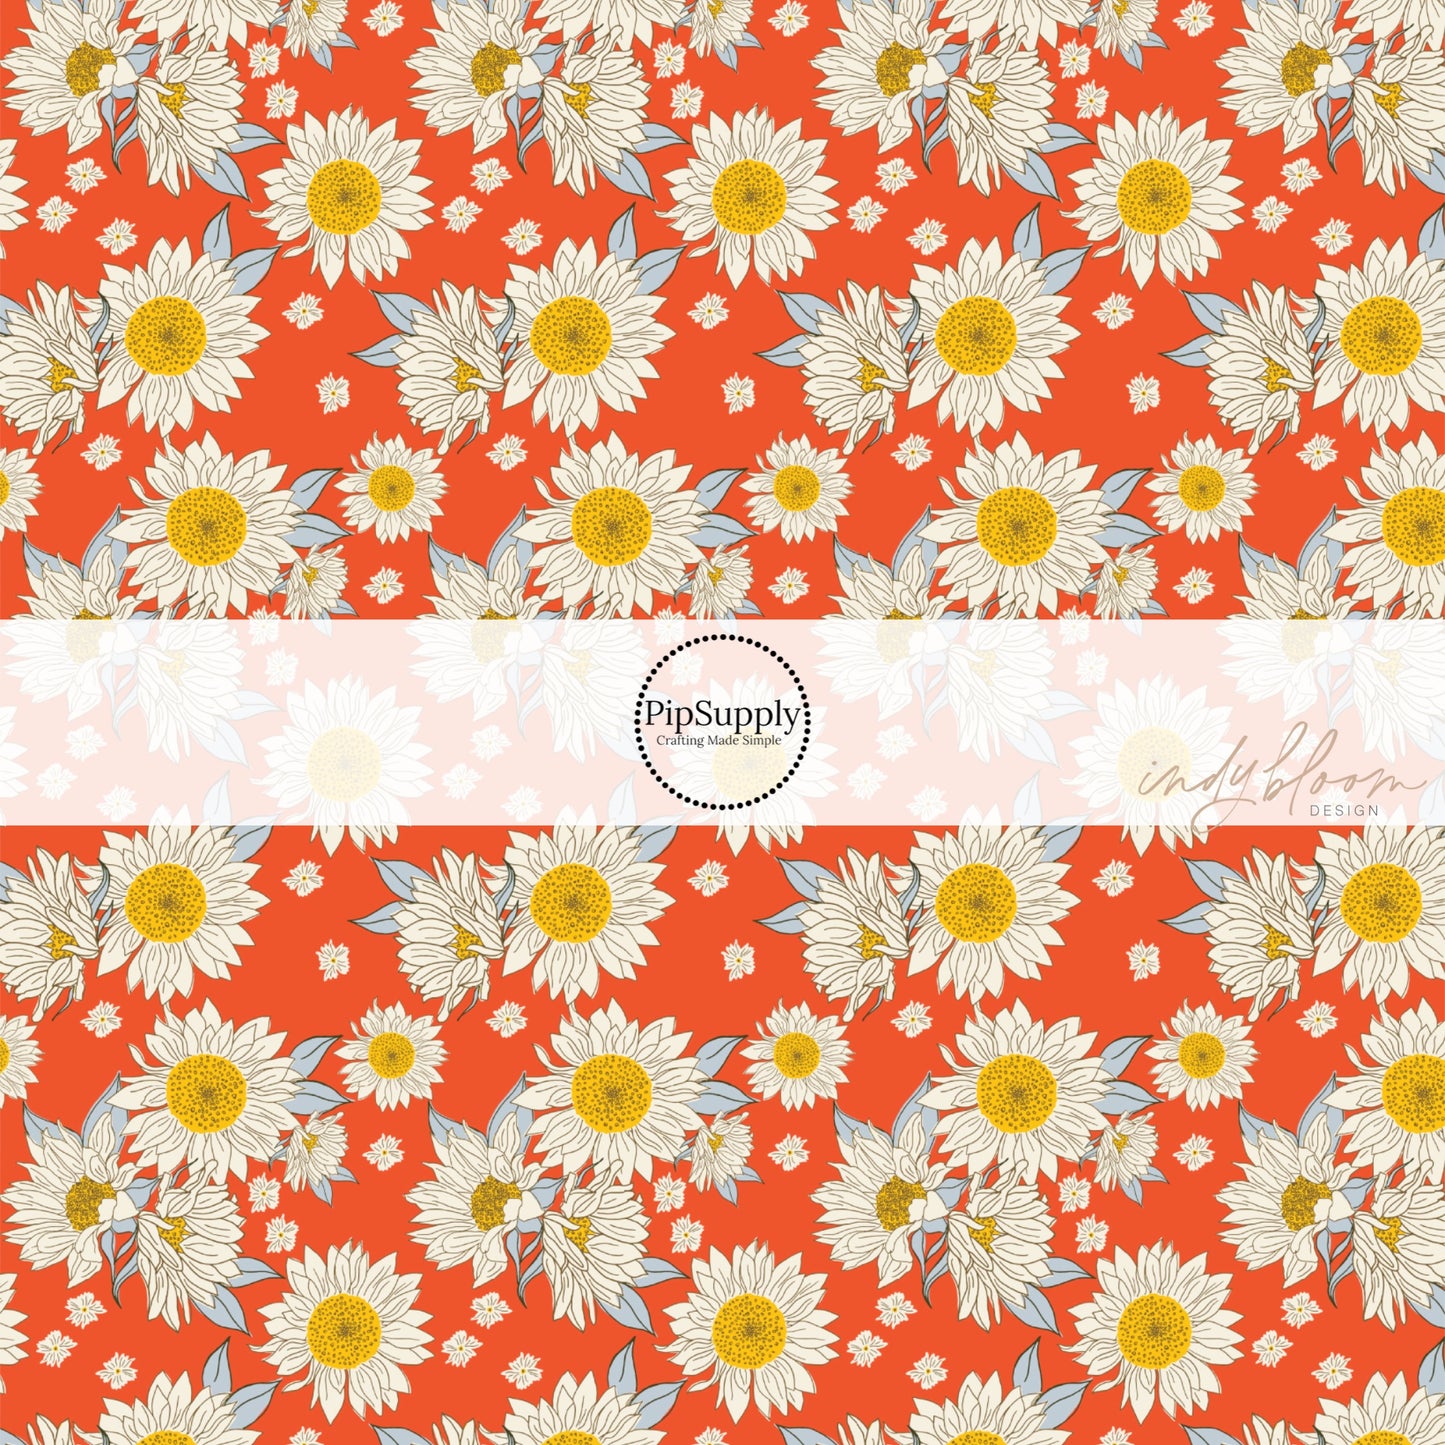 scattered cream sunflowers on bright red bow strips